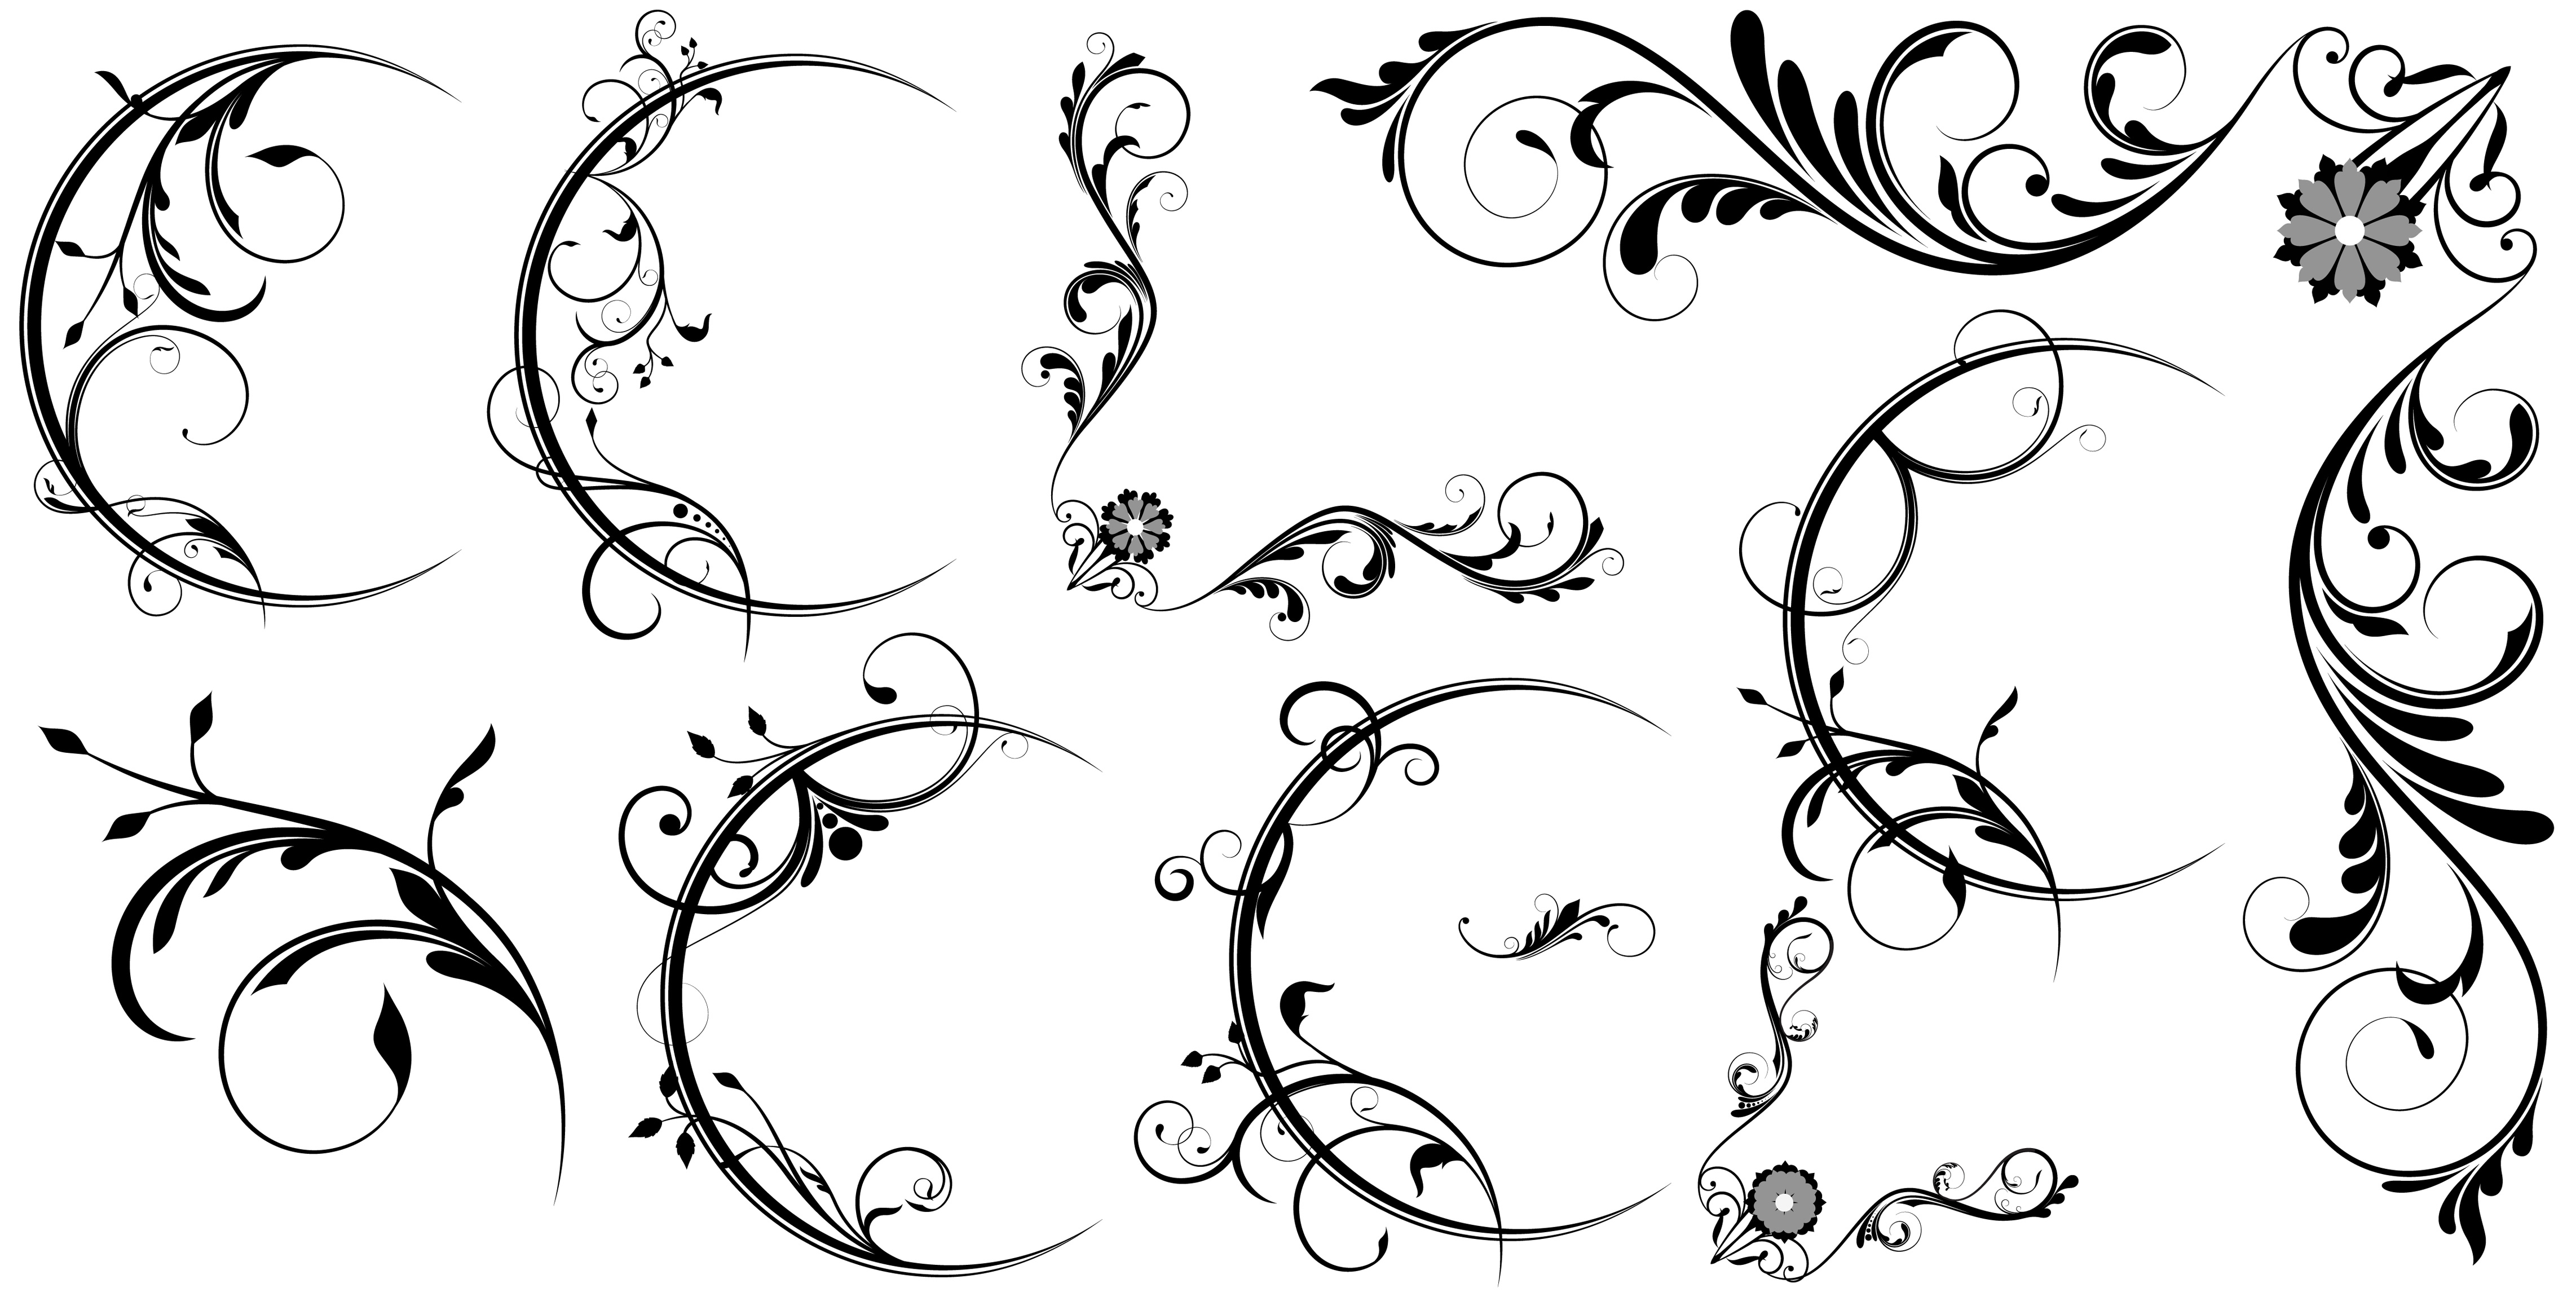 18 Art Free Vector For Photoshop Images